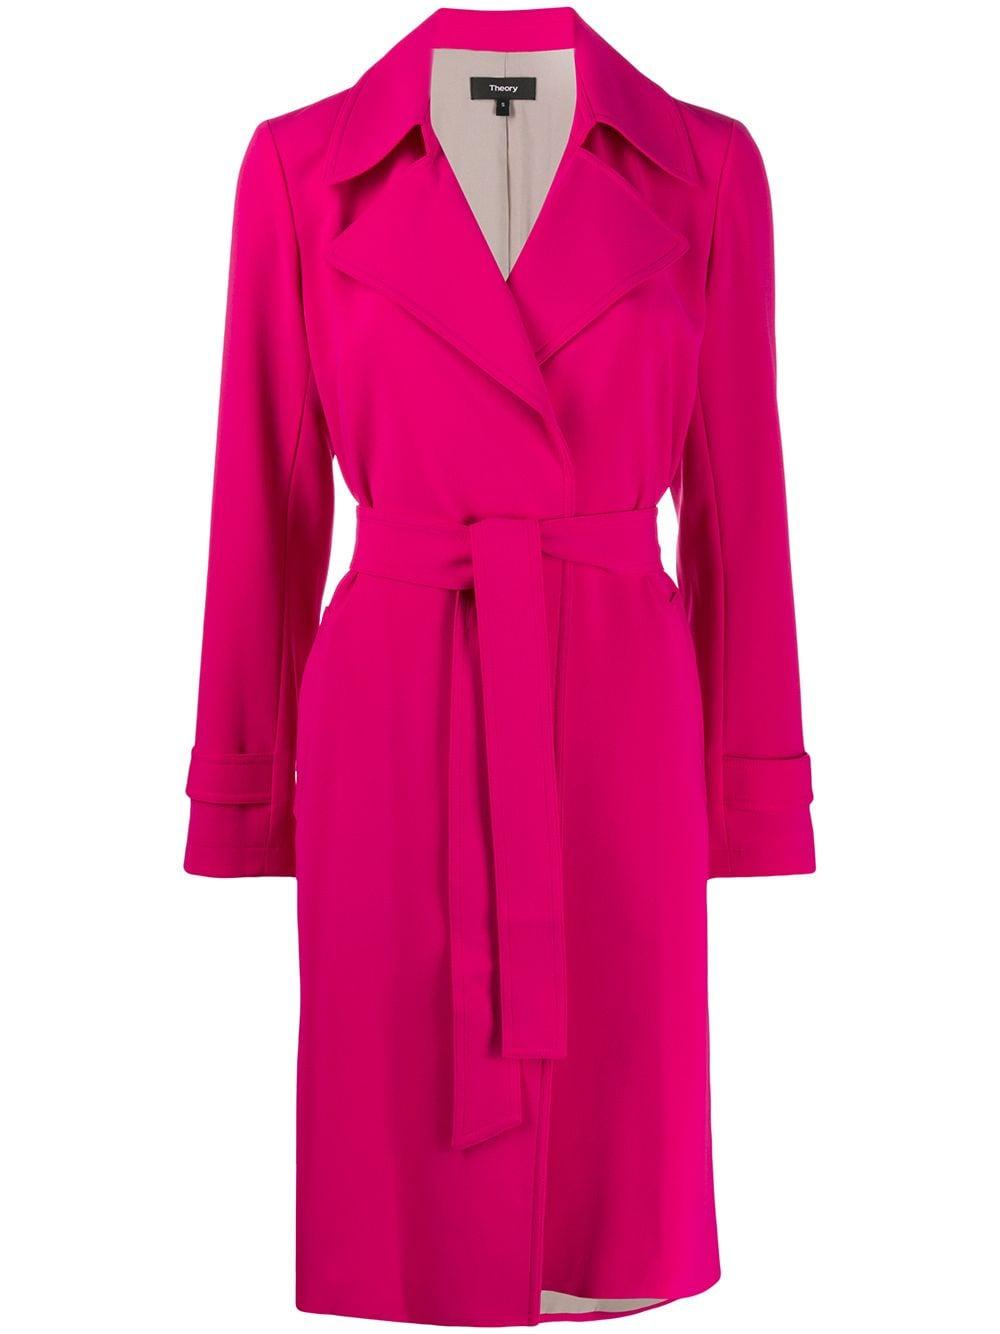 Theory Belted Trench Coat in Pink - Lyst